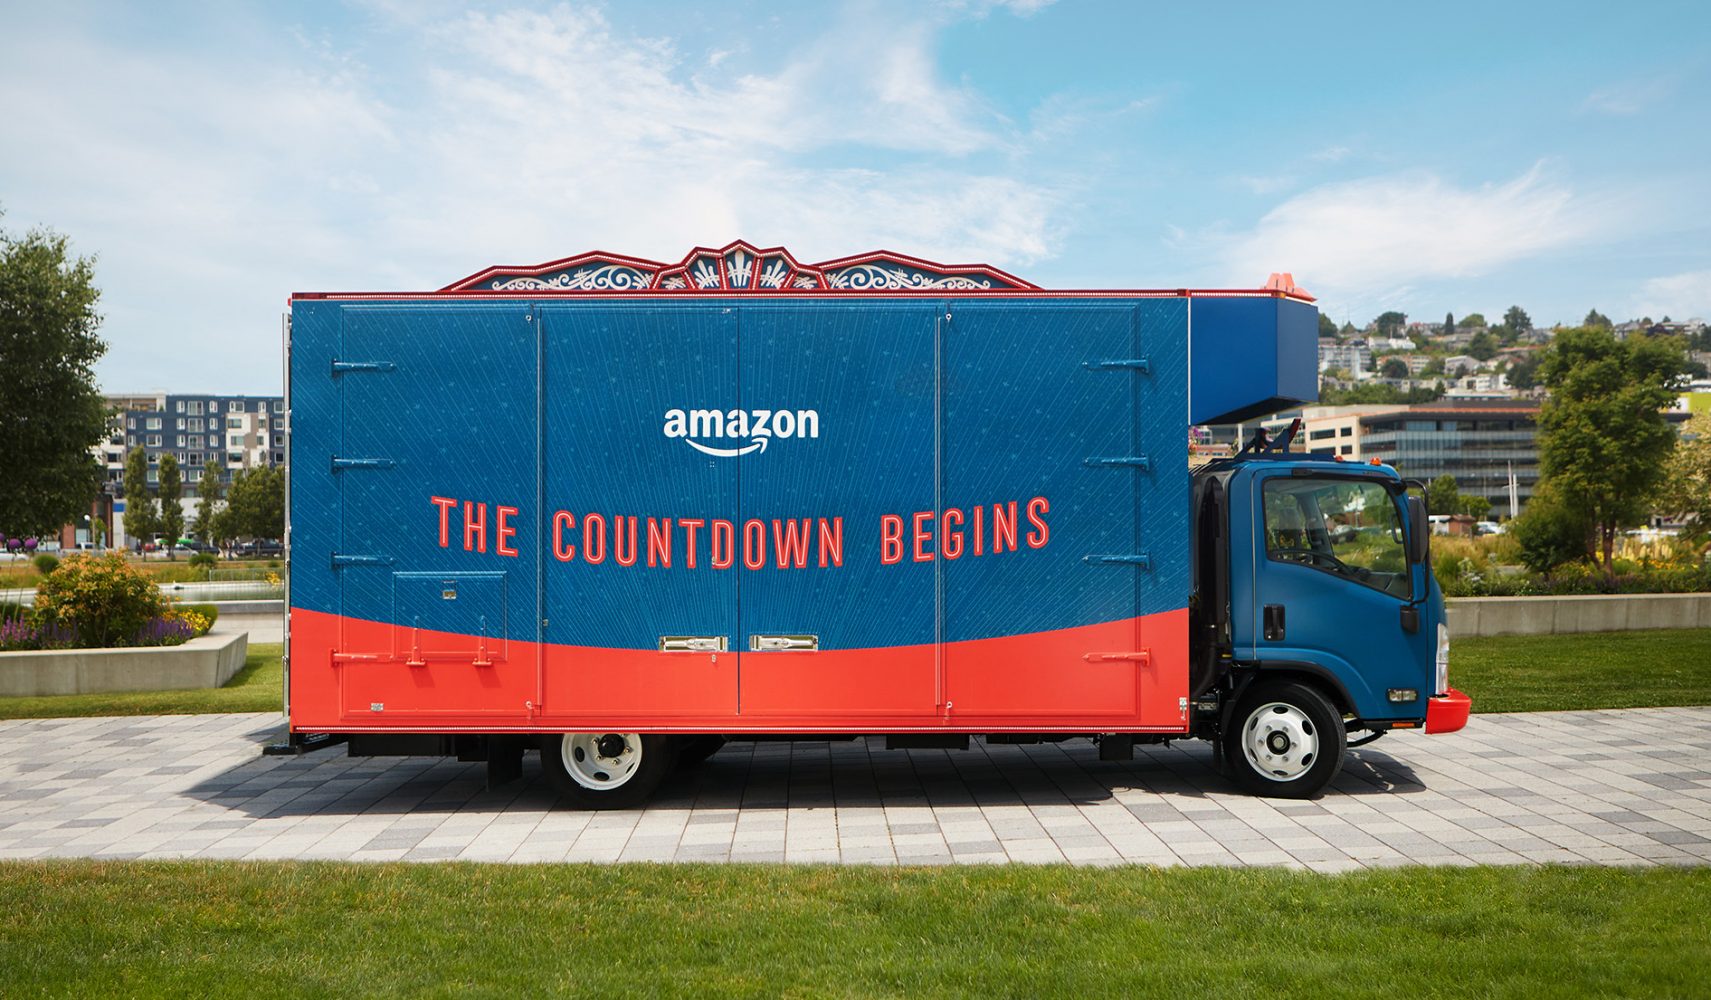 Exterior image of Amazon Treasure Truck, brand identity and global retail experience design by Household.